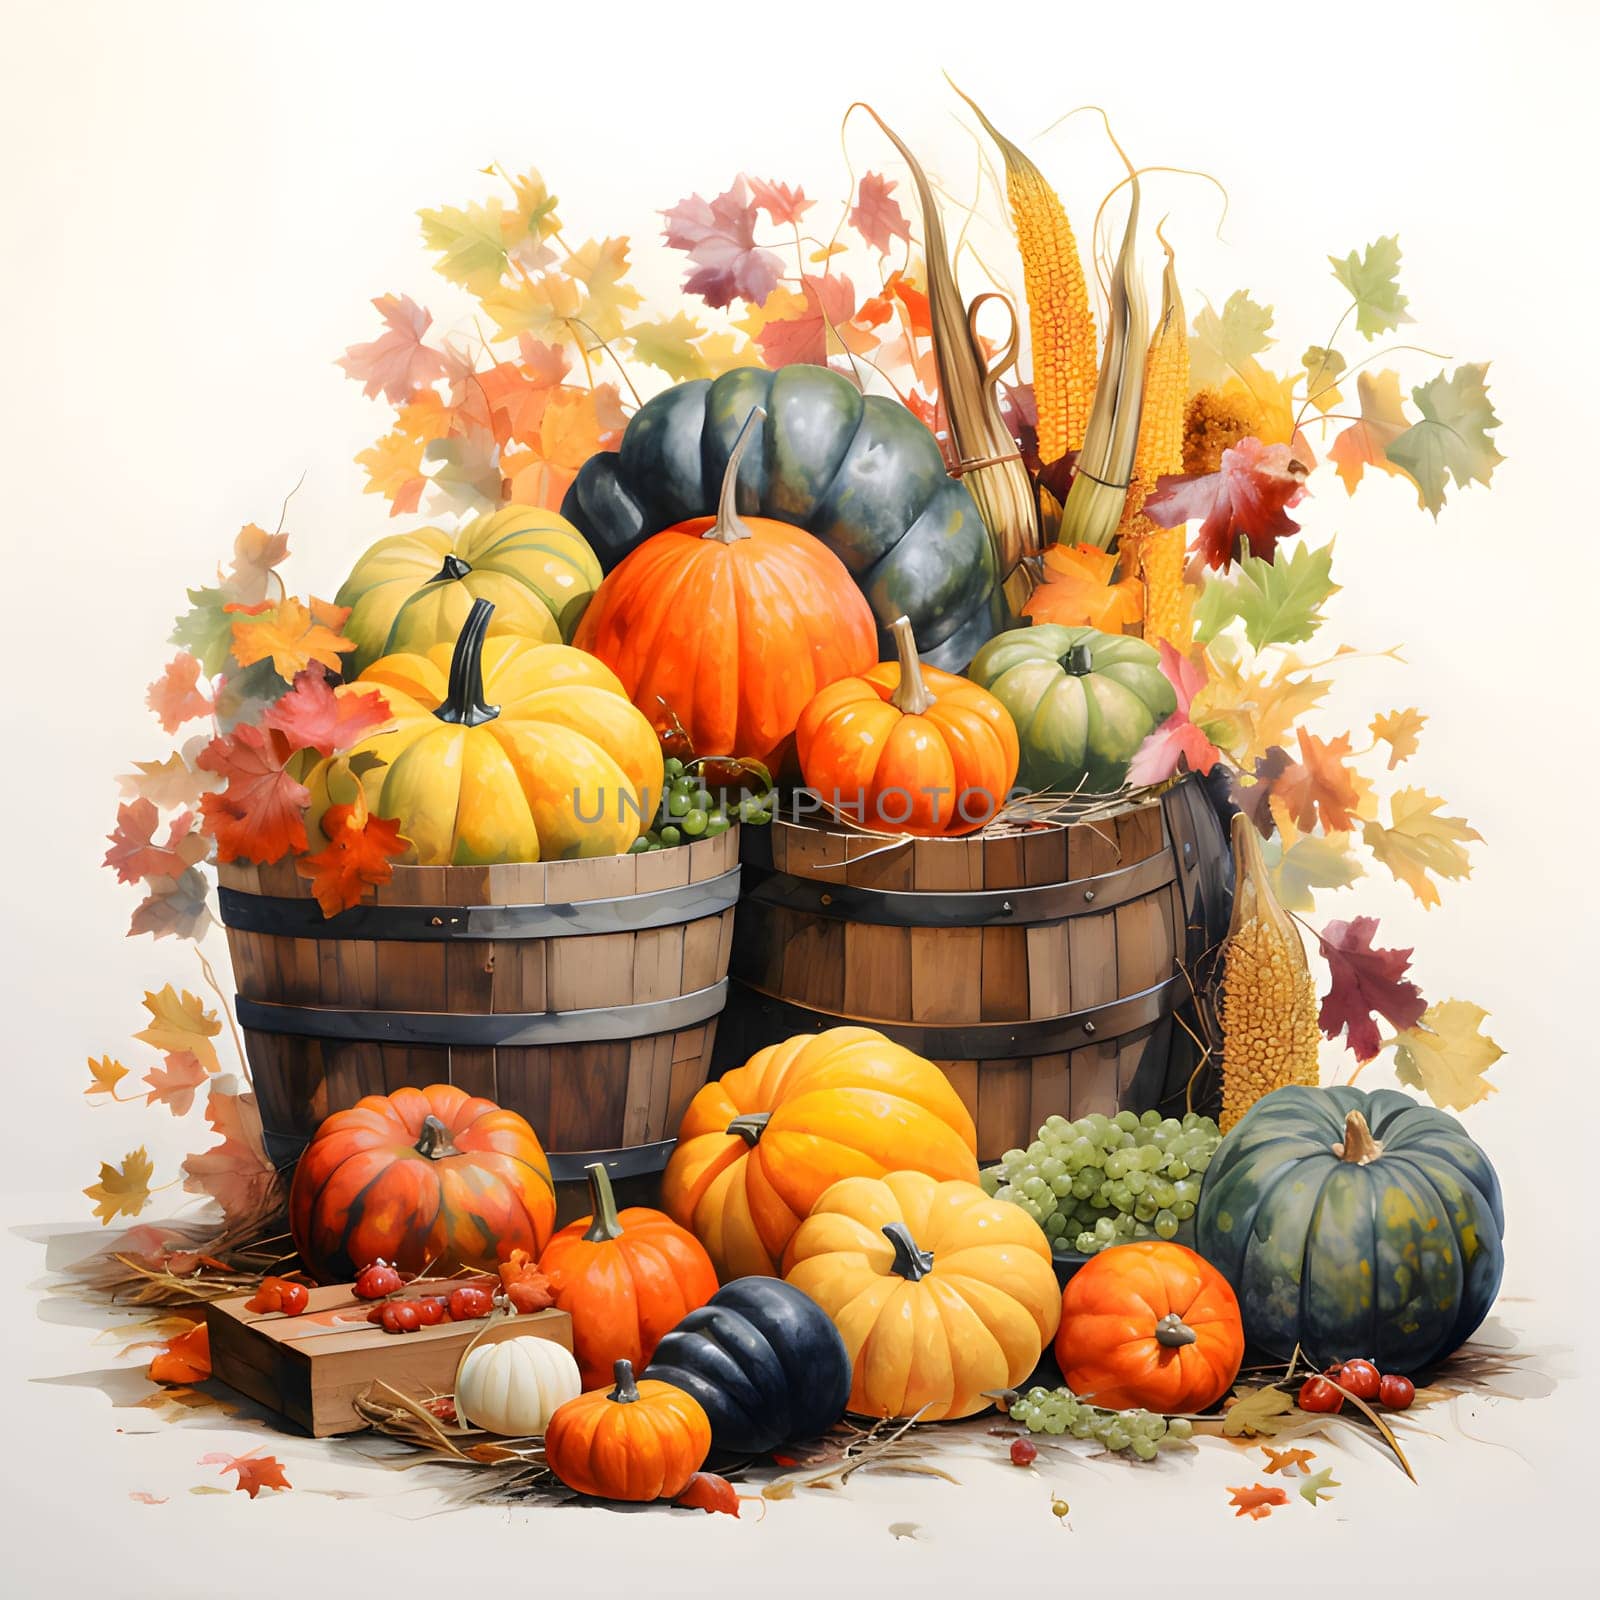 Two wooden buckets with colorful pumpkins and autumn leaves in them. Pumpkin as a dish of thanksgiving for the harvest, picture on a white isolated background. An atmosphere of joy and celebration.